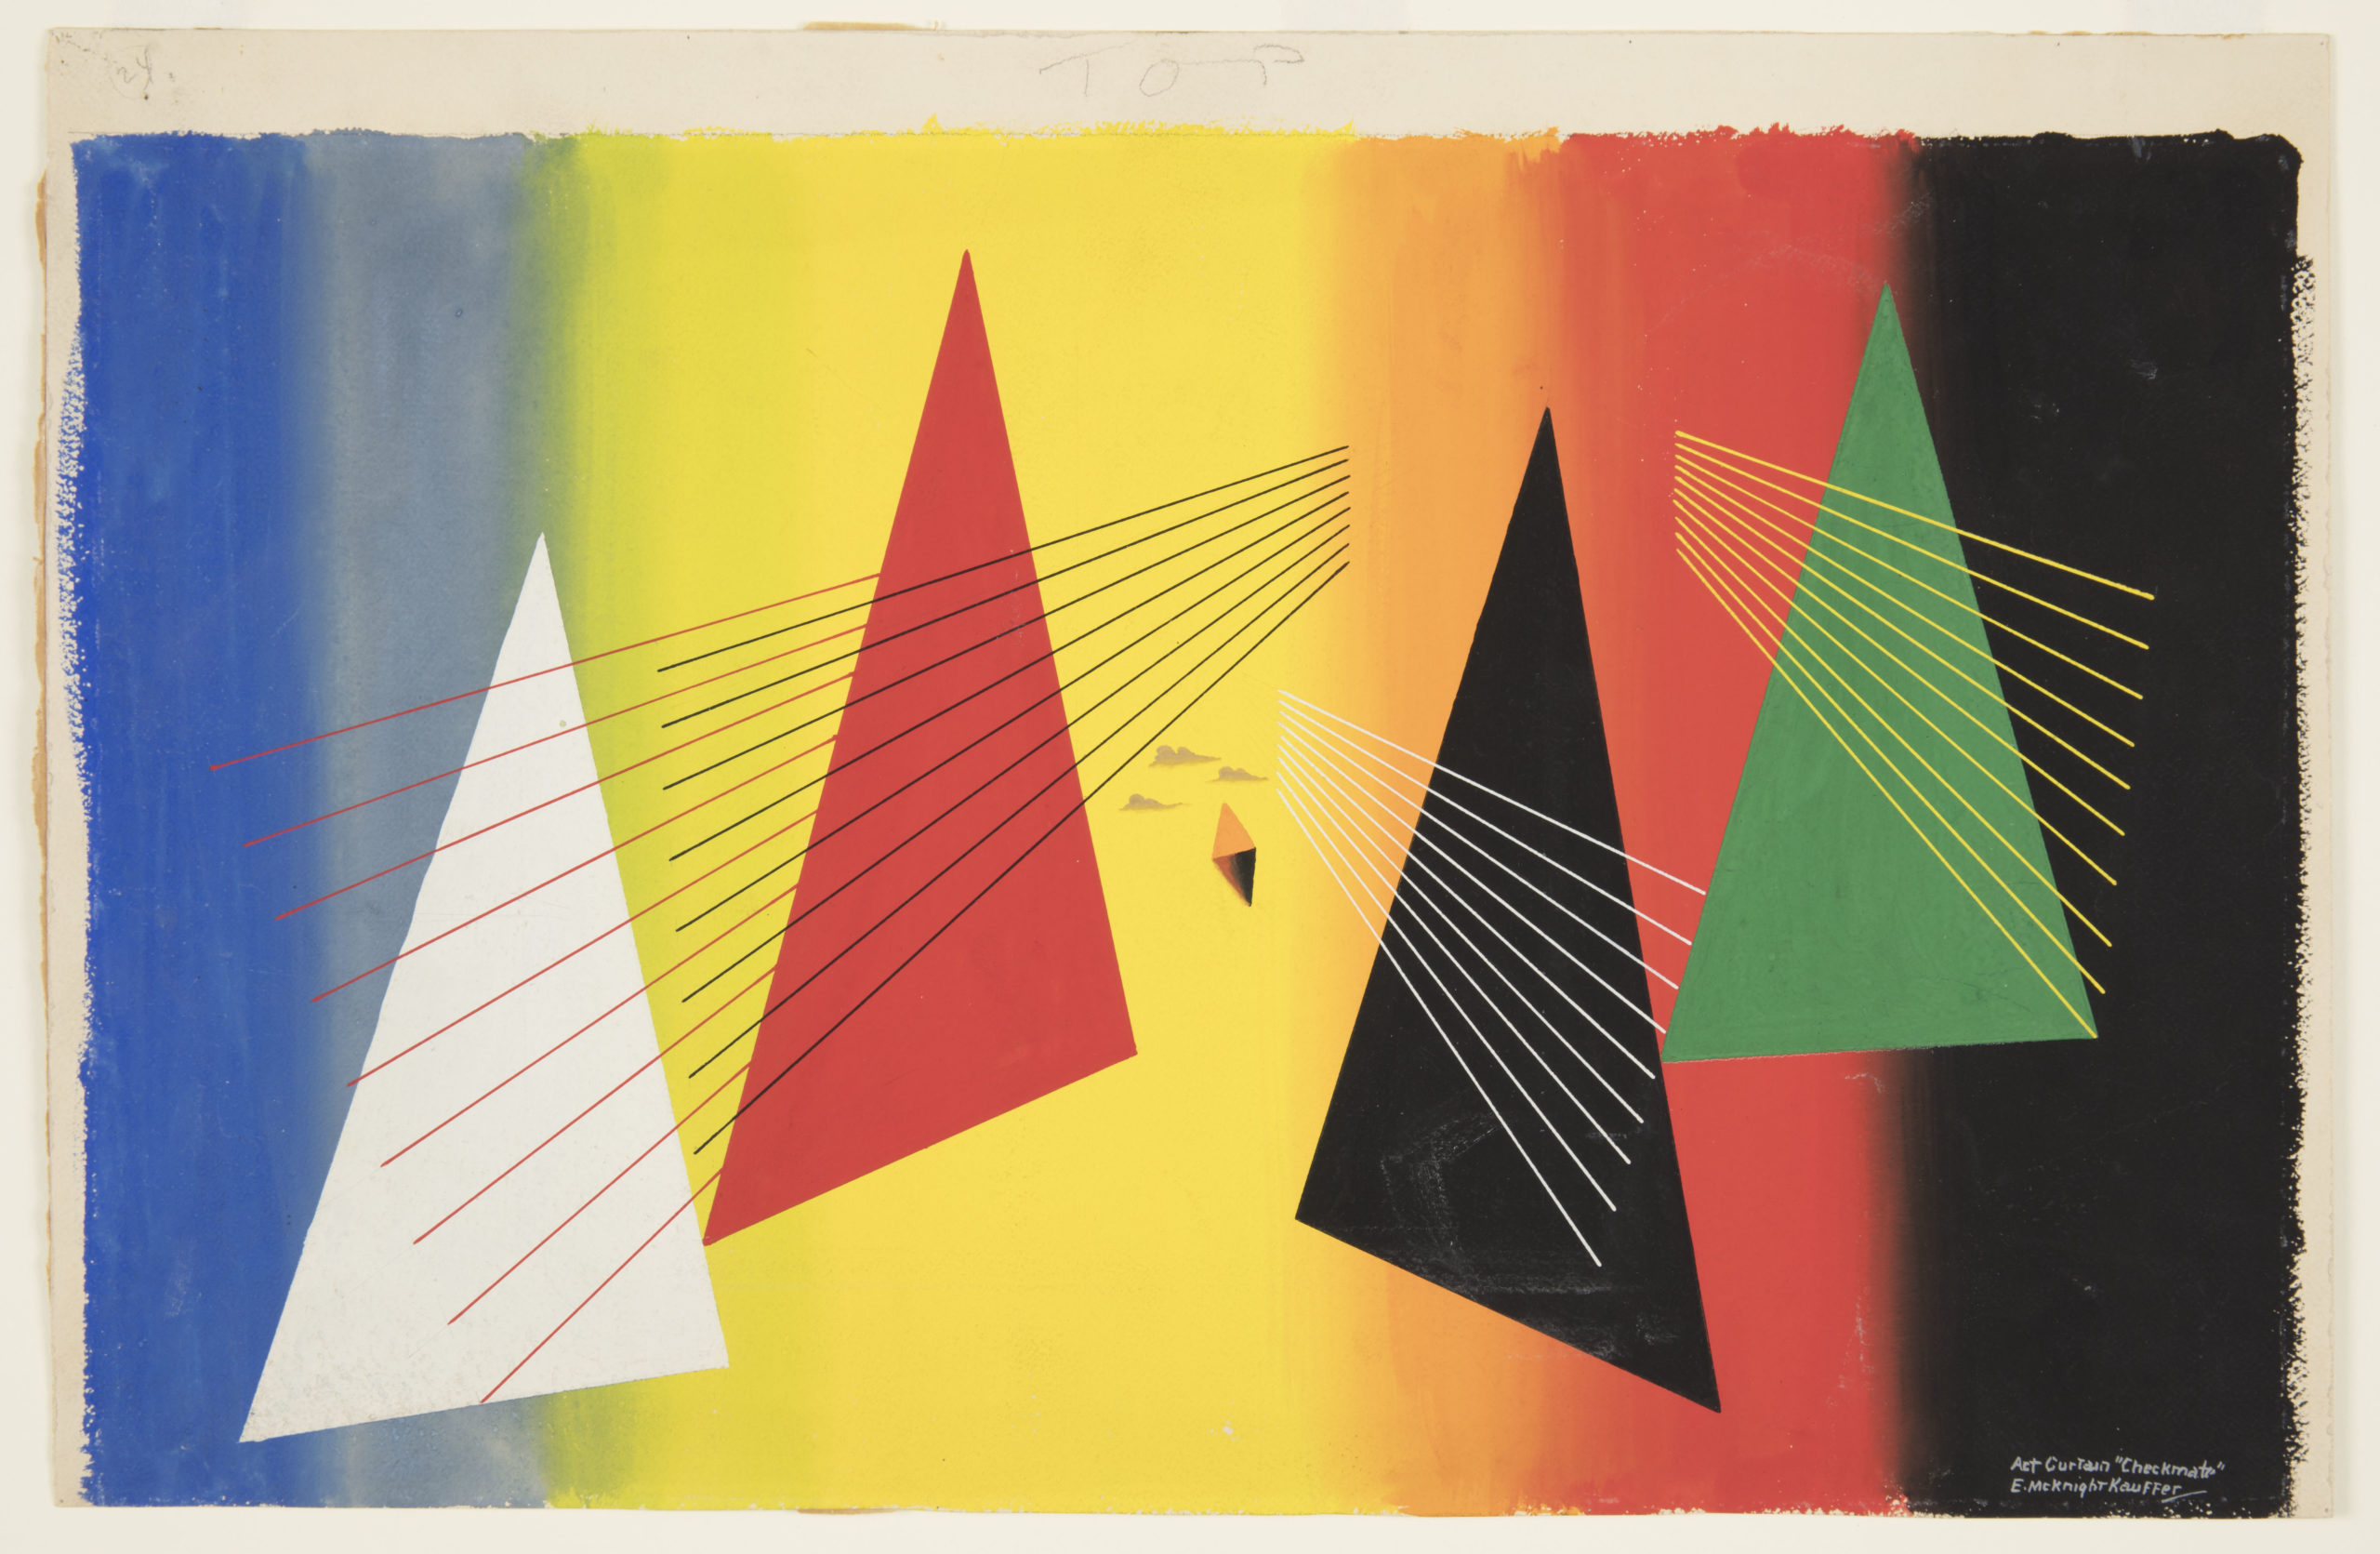 Design for the backdrop used during the main act of "Checkmate". Background composed of vertical stripes of blue, green, yellow, orange, red and black. At center, 4 large triangles in white, red, black, and green white, red, and green superimposed with three groupings of perspectival, converging lines. At center, an orange diamond and three small, gray cloud forms.